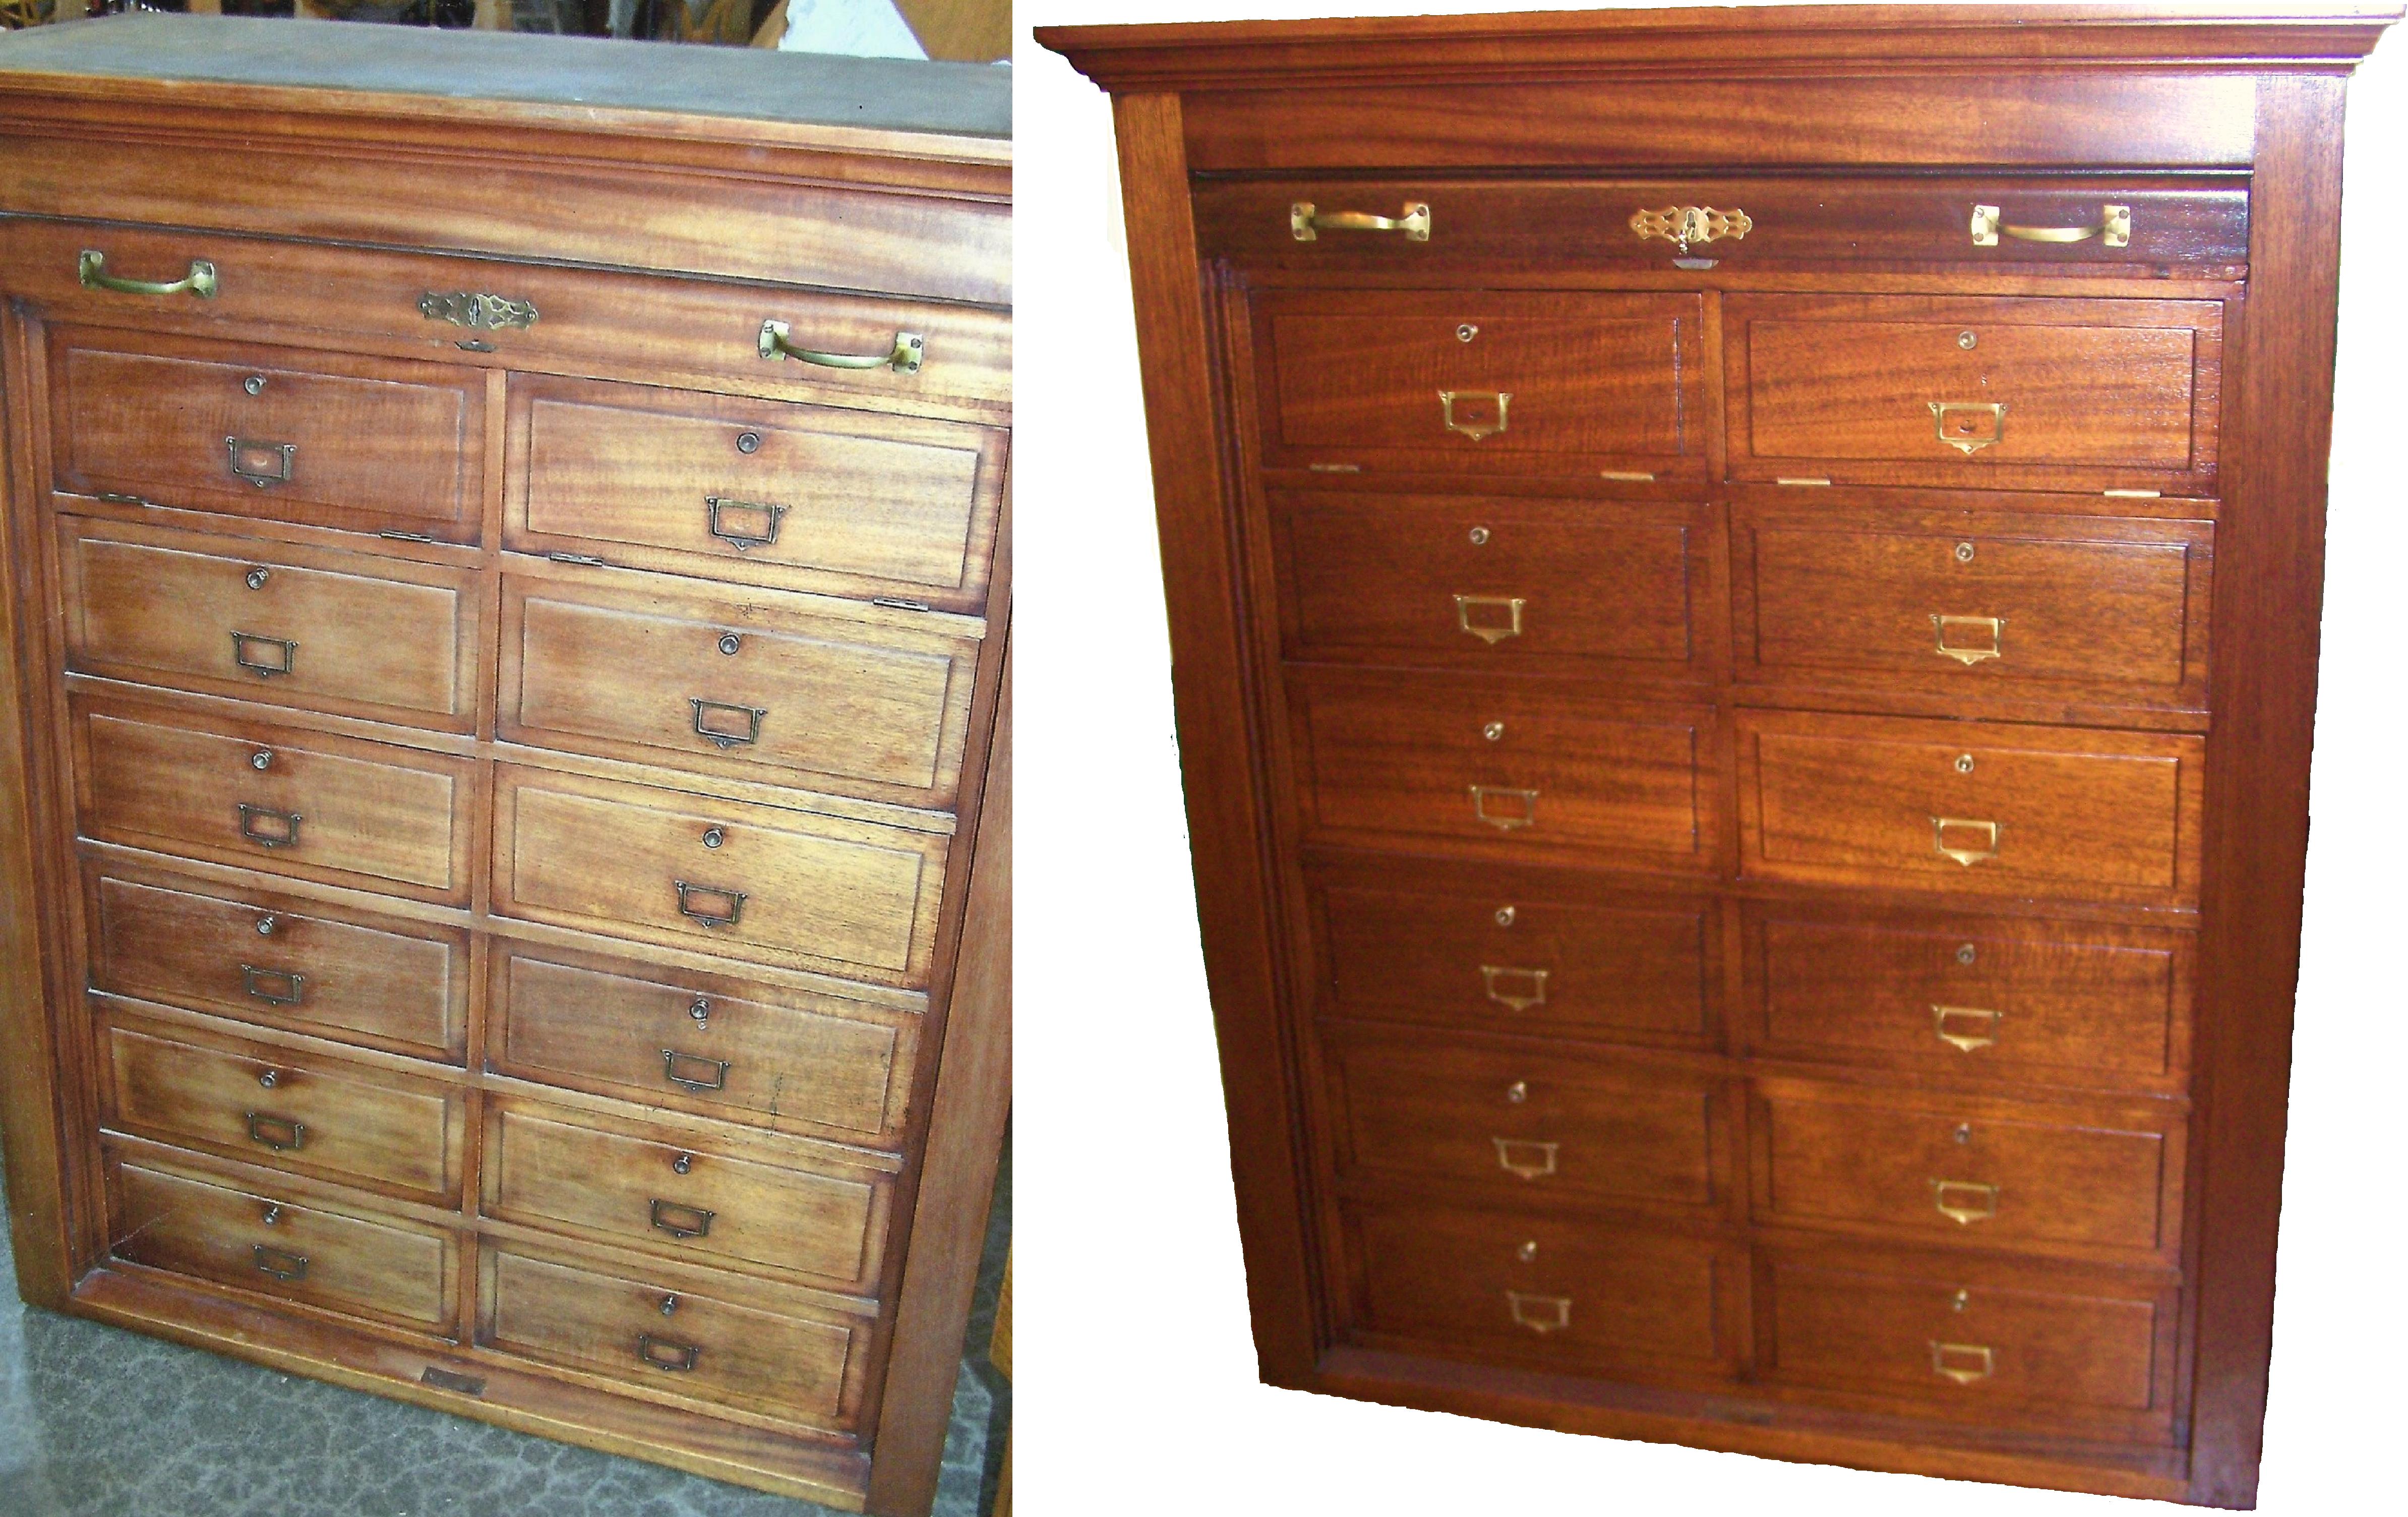 Antique Cabinet A Customer From West Bend Chose Us To Restore This Antique Cabinet To Fit Their Decor